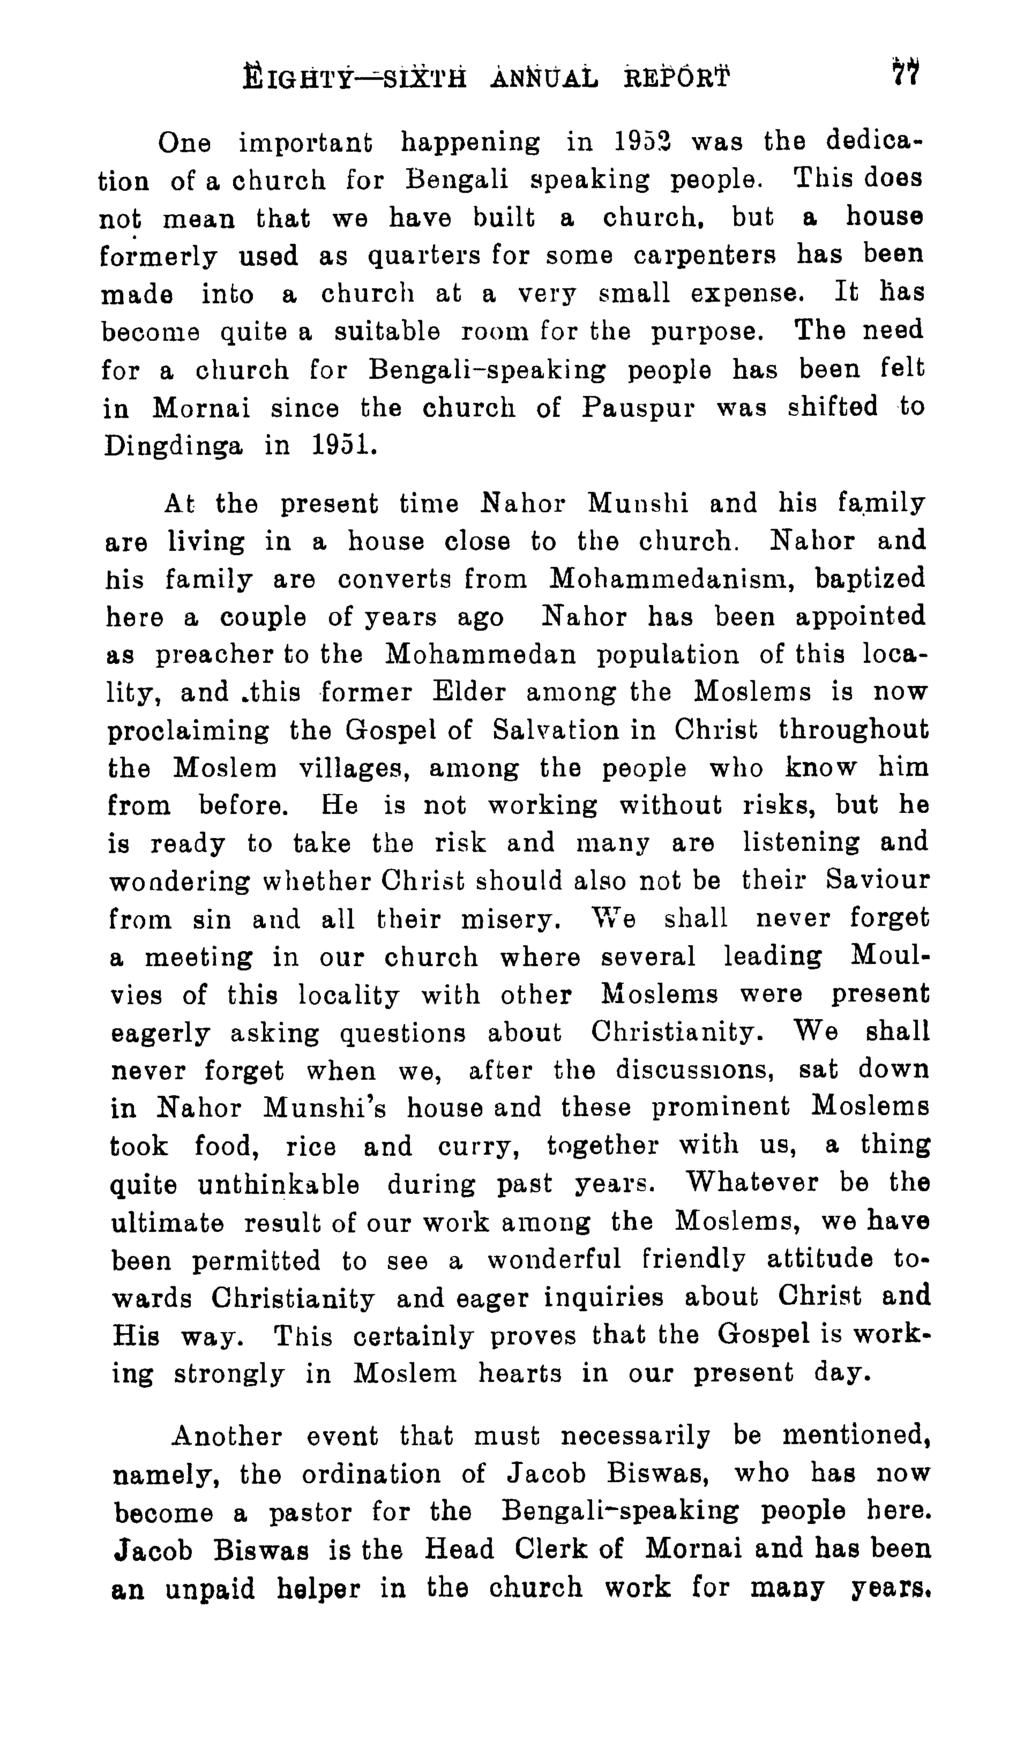 One important happening in 1952 was the dedication of a church for Bengali speaking people. This does not mean that we have built a church.